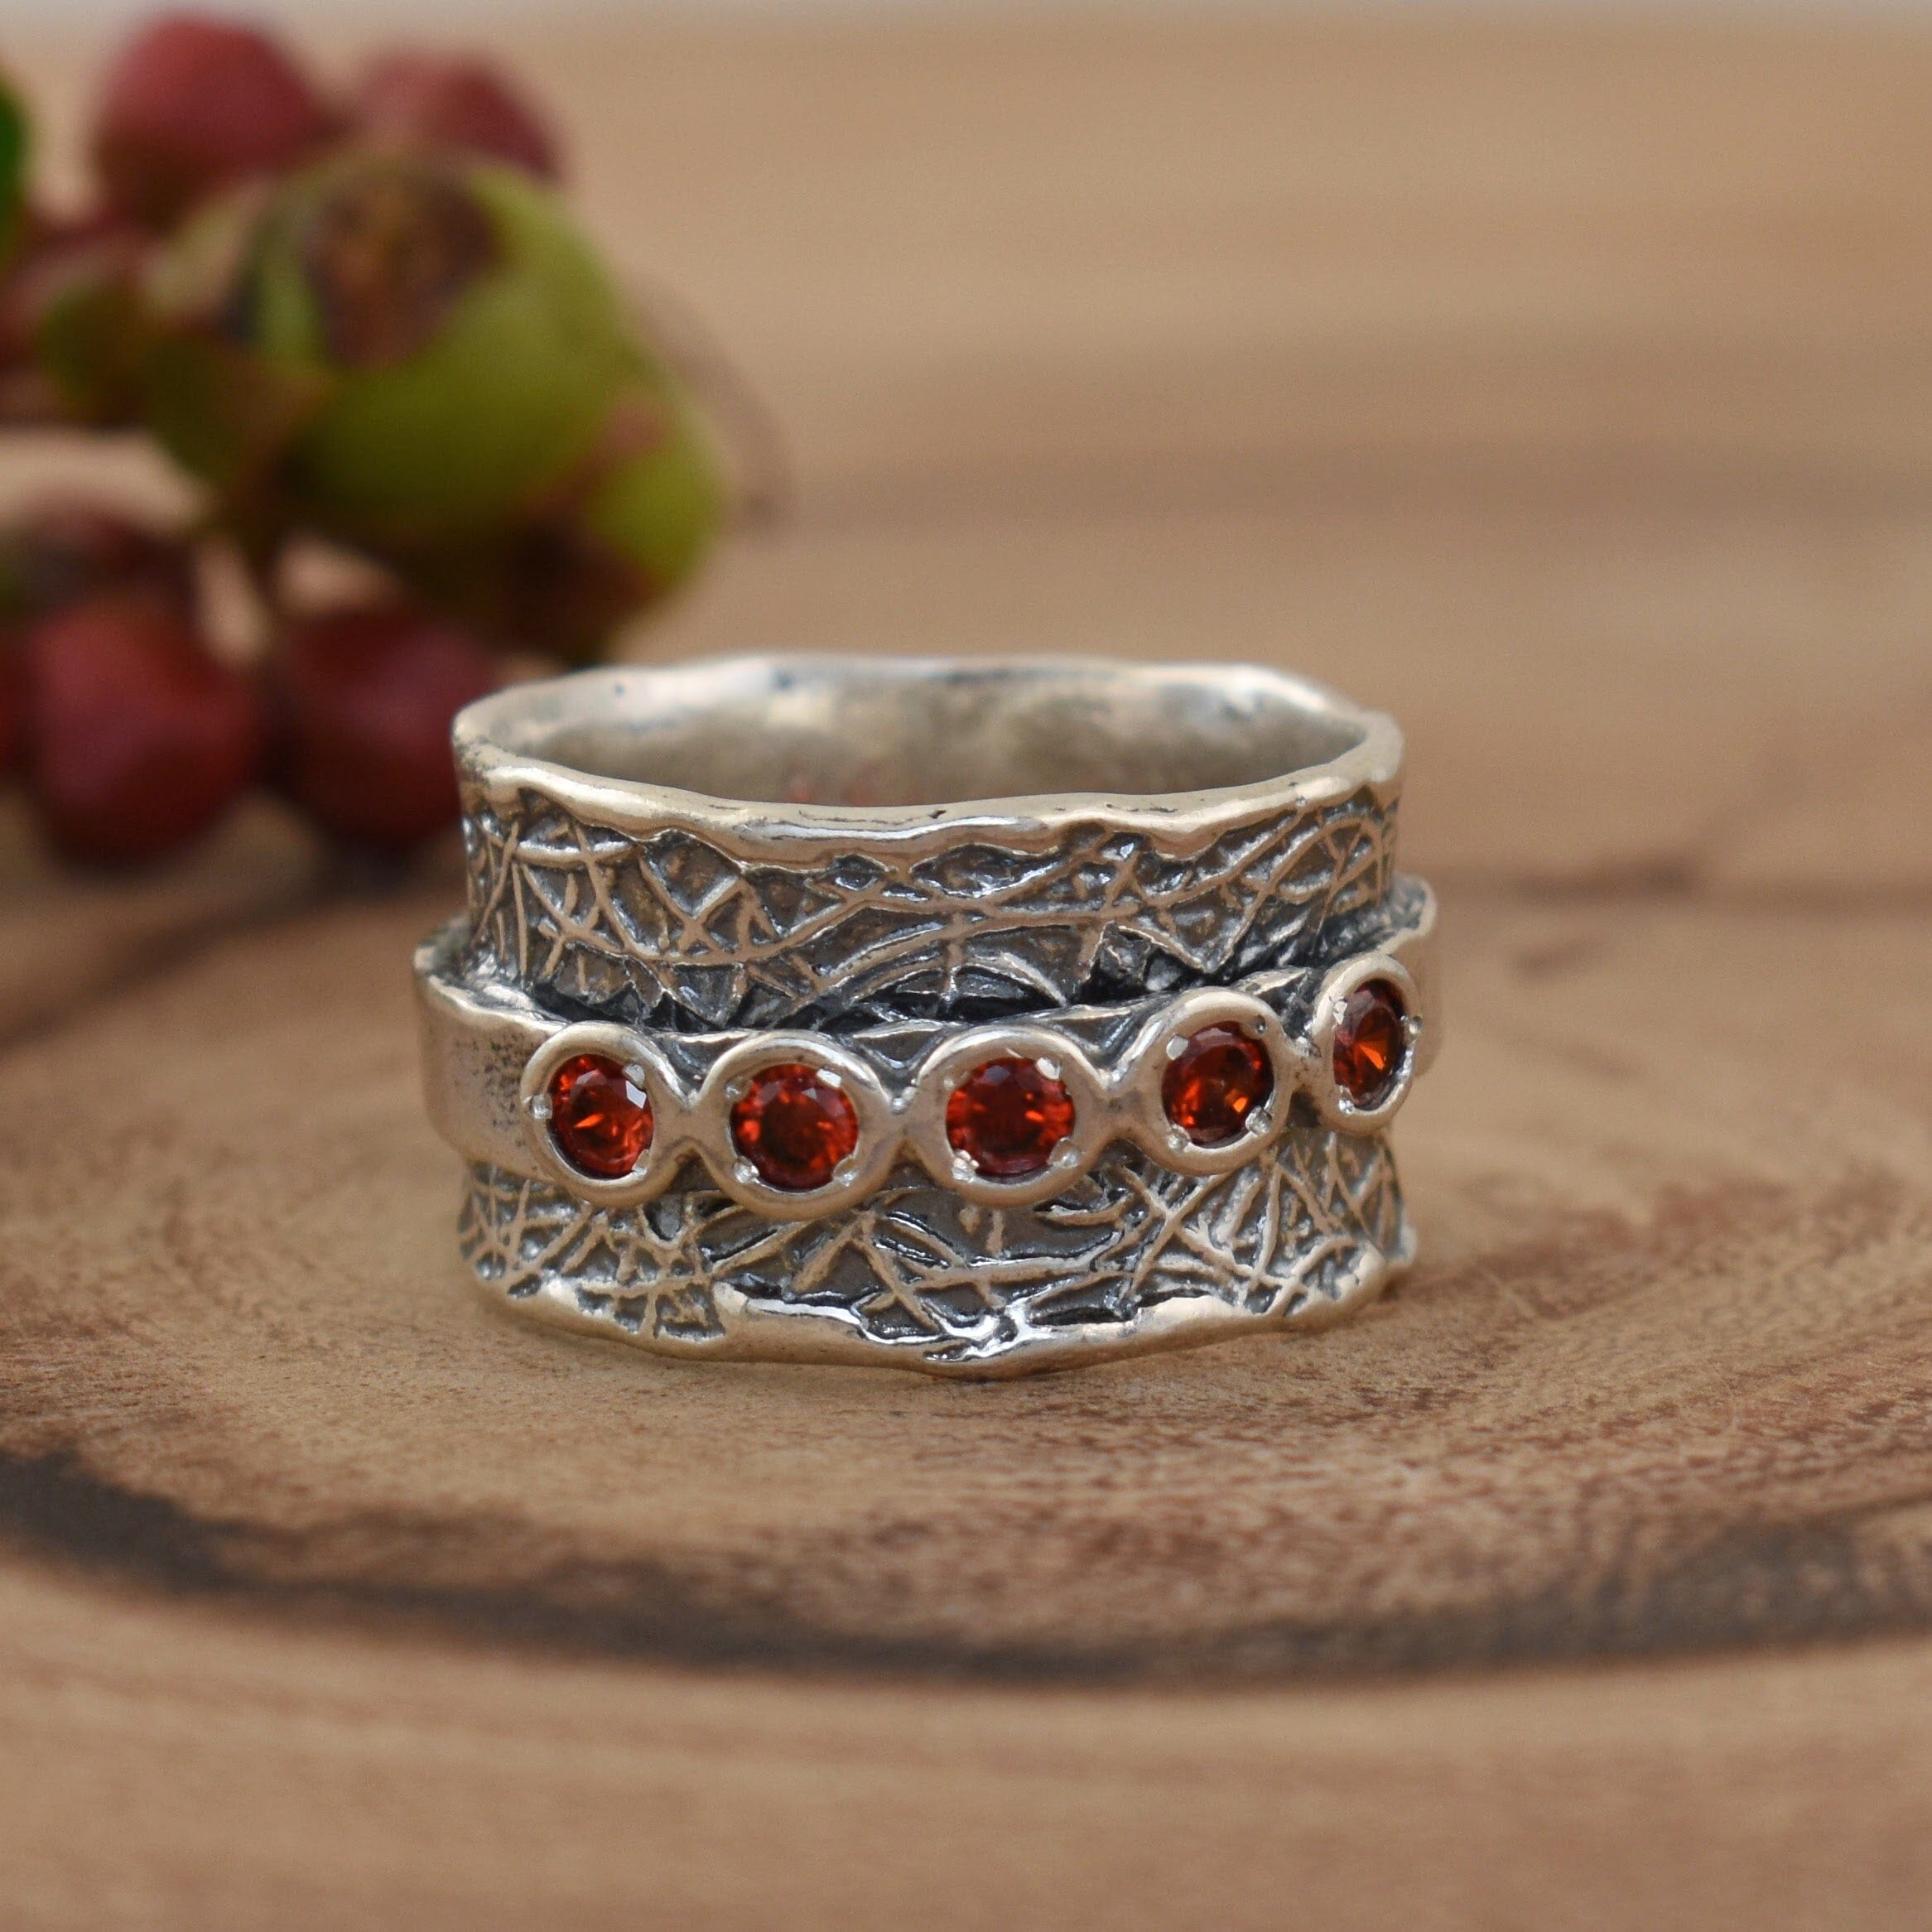 Sterling silver spinner band ring with carnelian colored cz stones